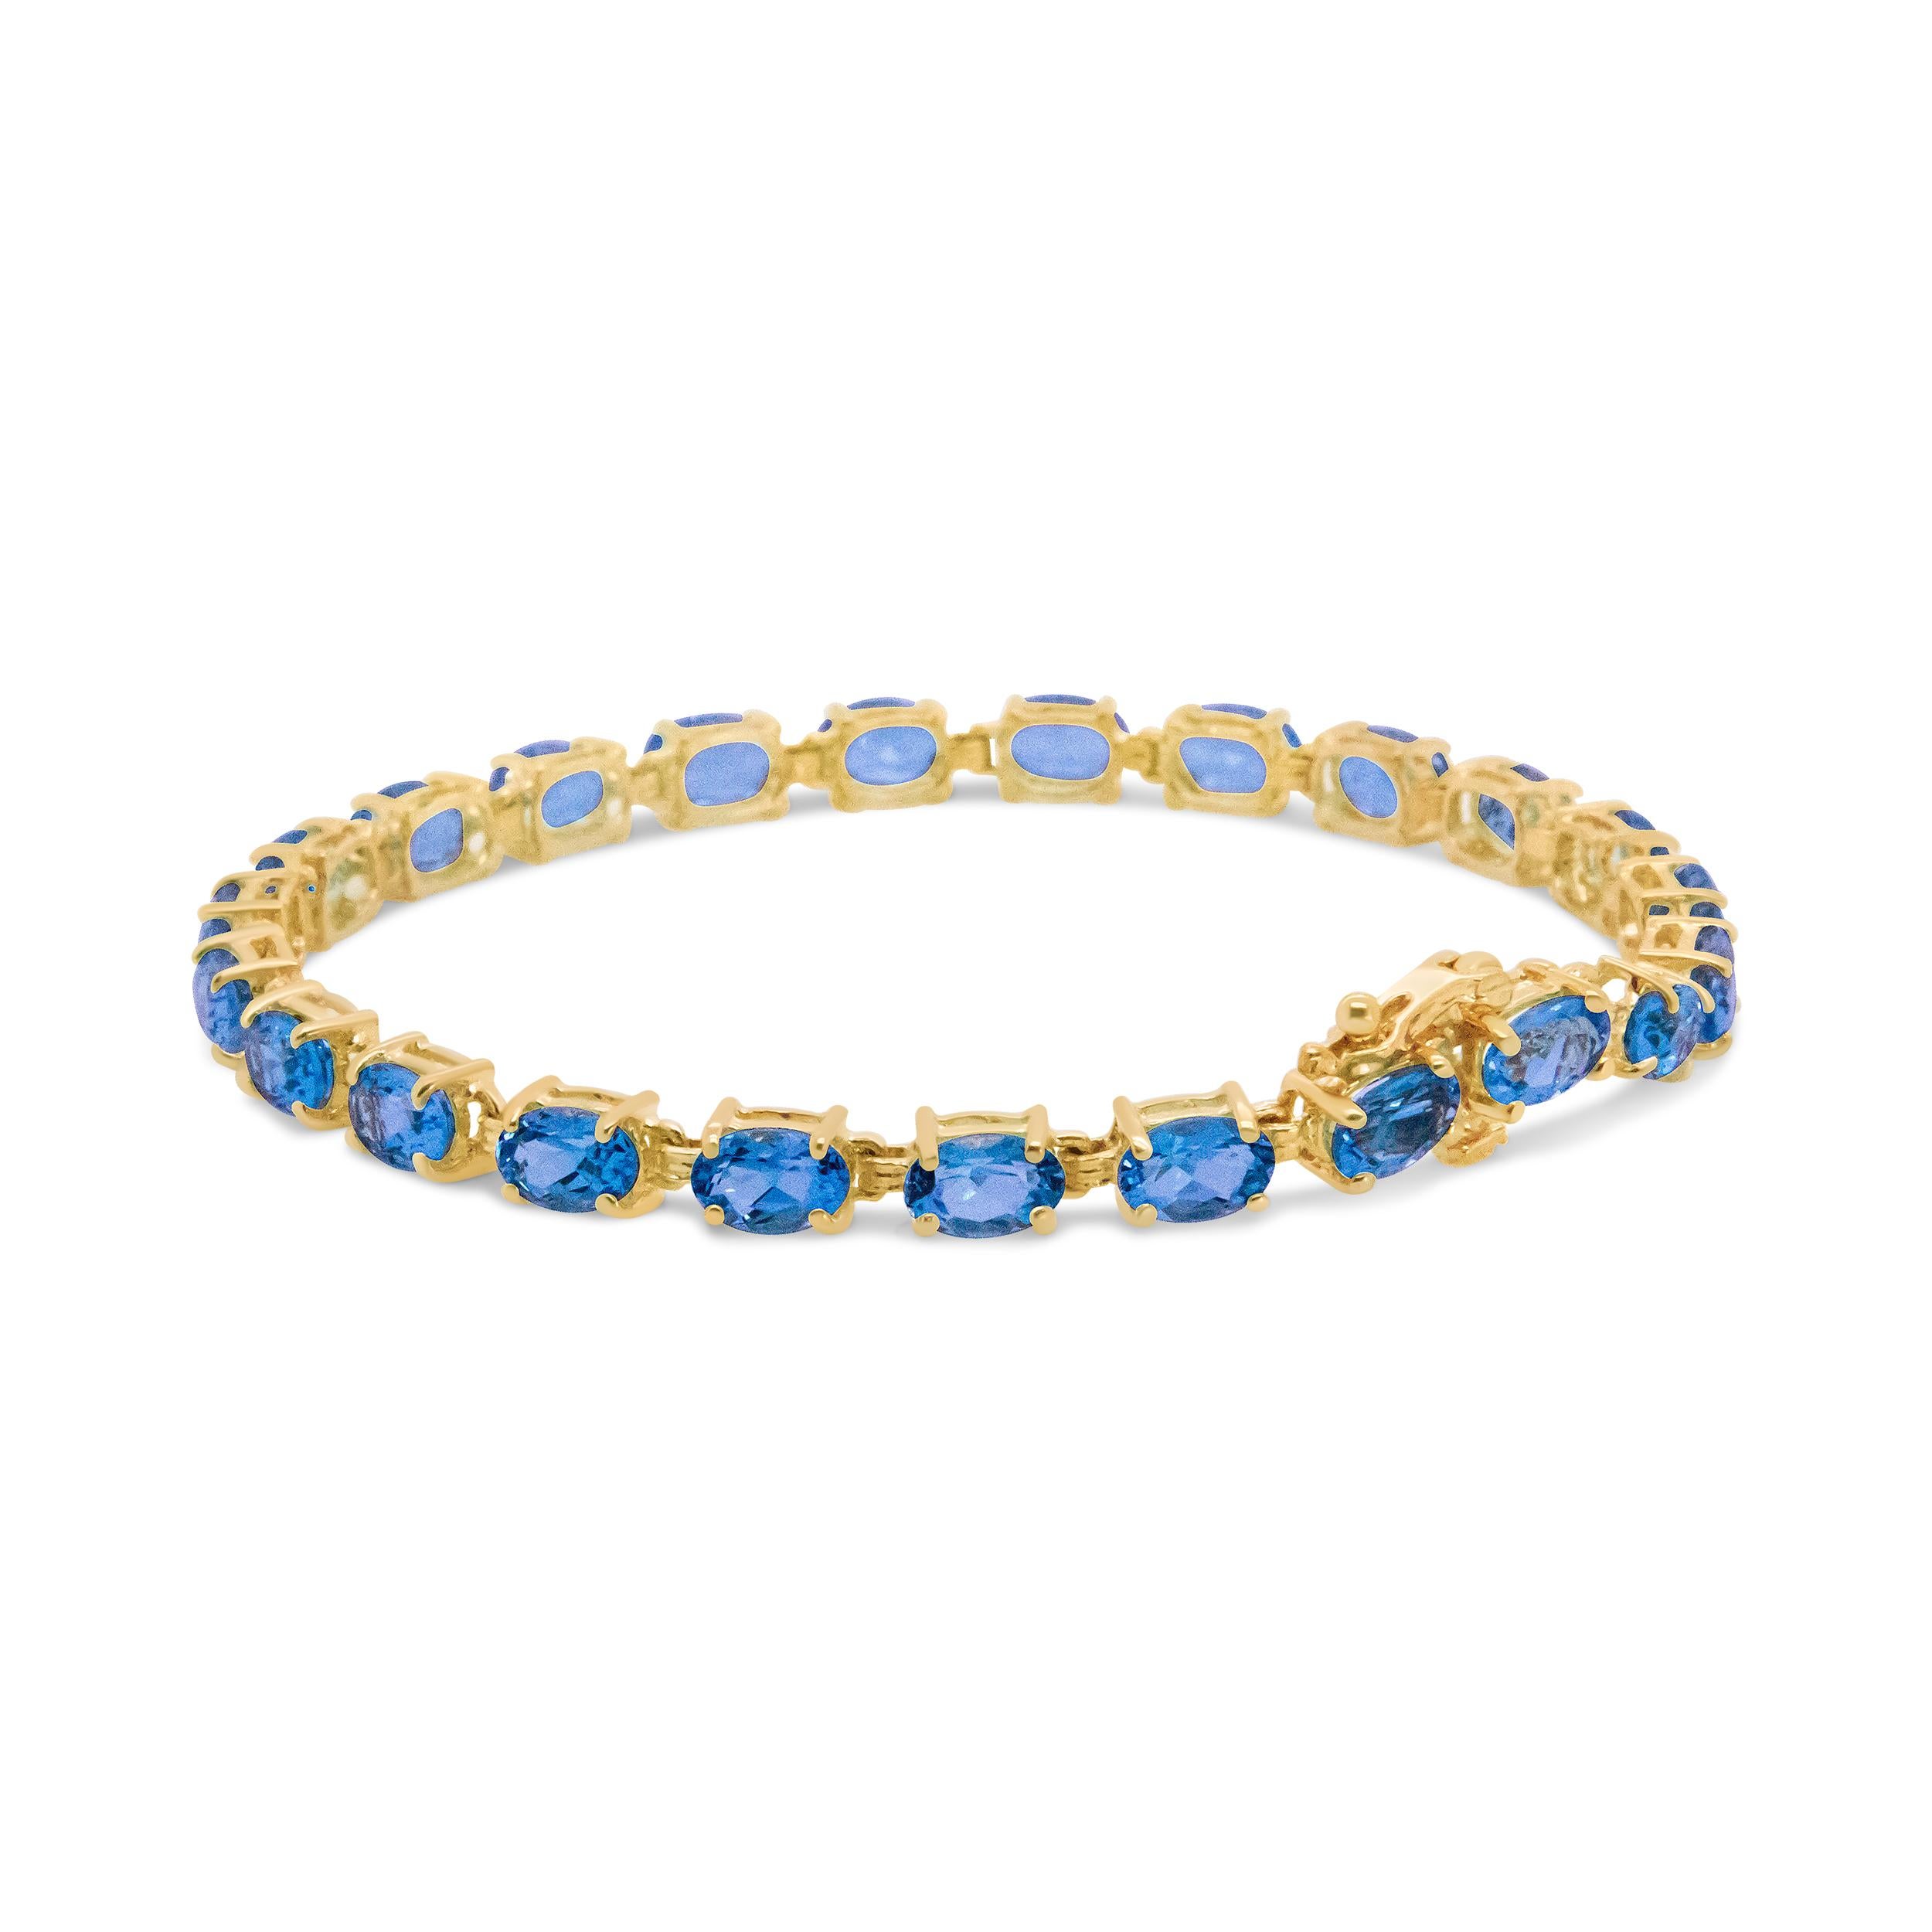 Wrapped in luxurious gold sits stunning oval shaped topaz stones on this one-of-a-kind bracelet. The 10k yellow gold shines against the deep blue color of the topaz gemstones for a polished and glamourous look. This piece should be considered an